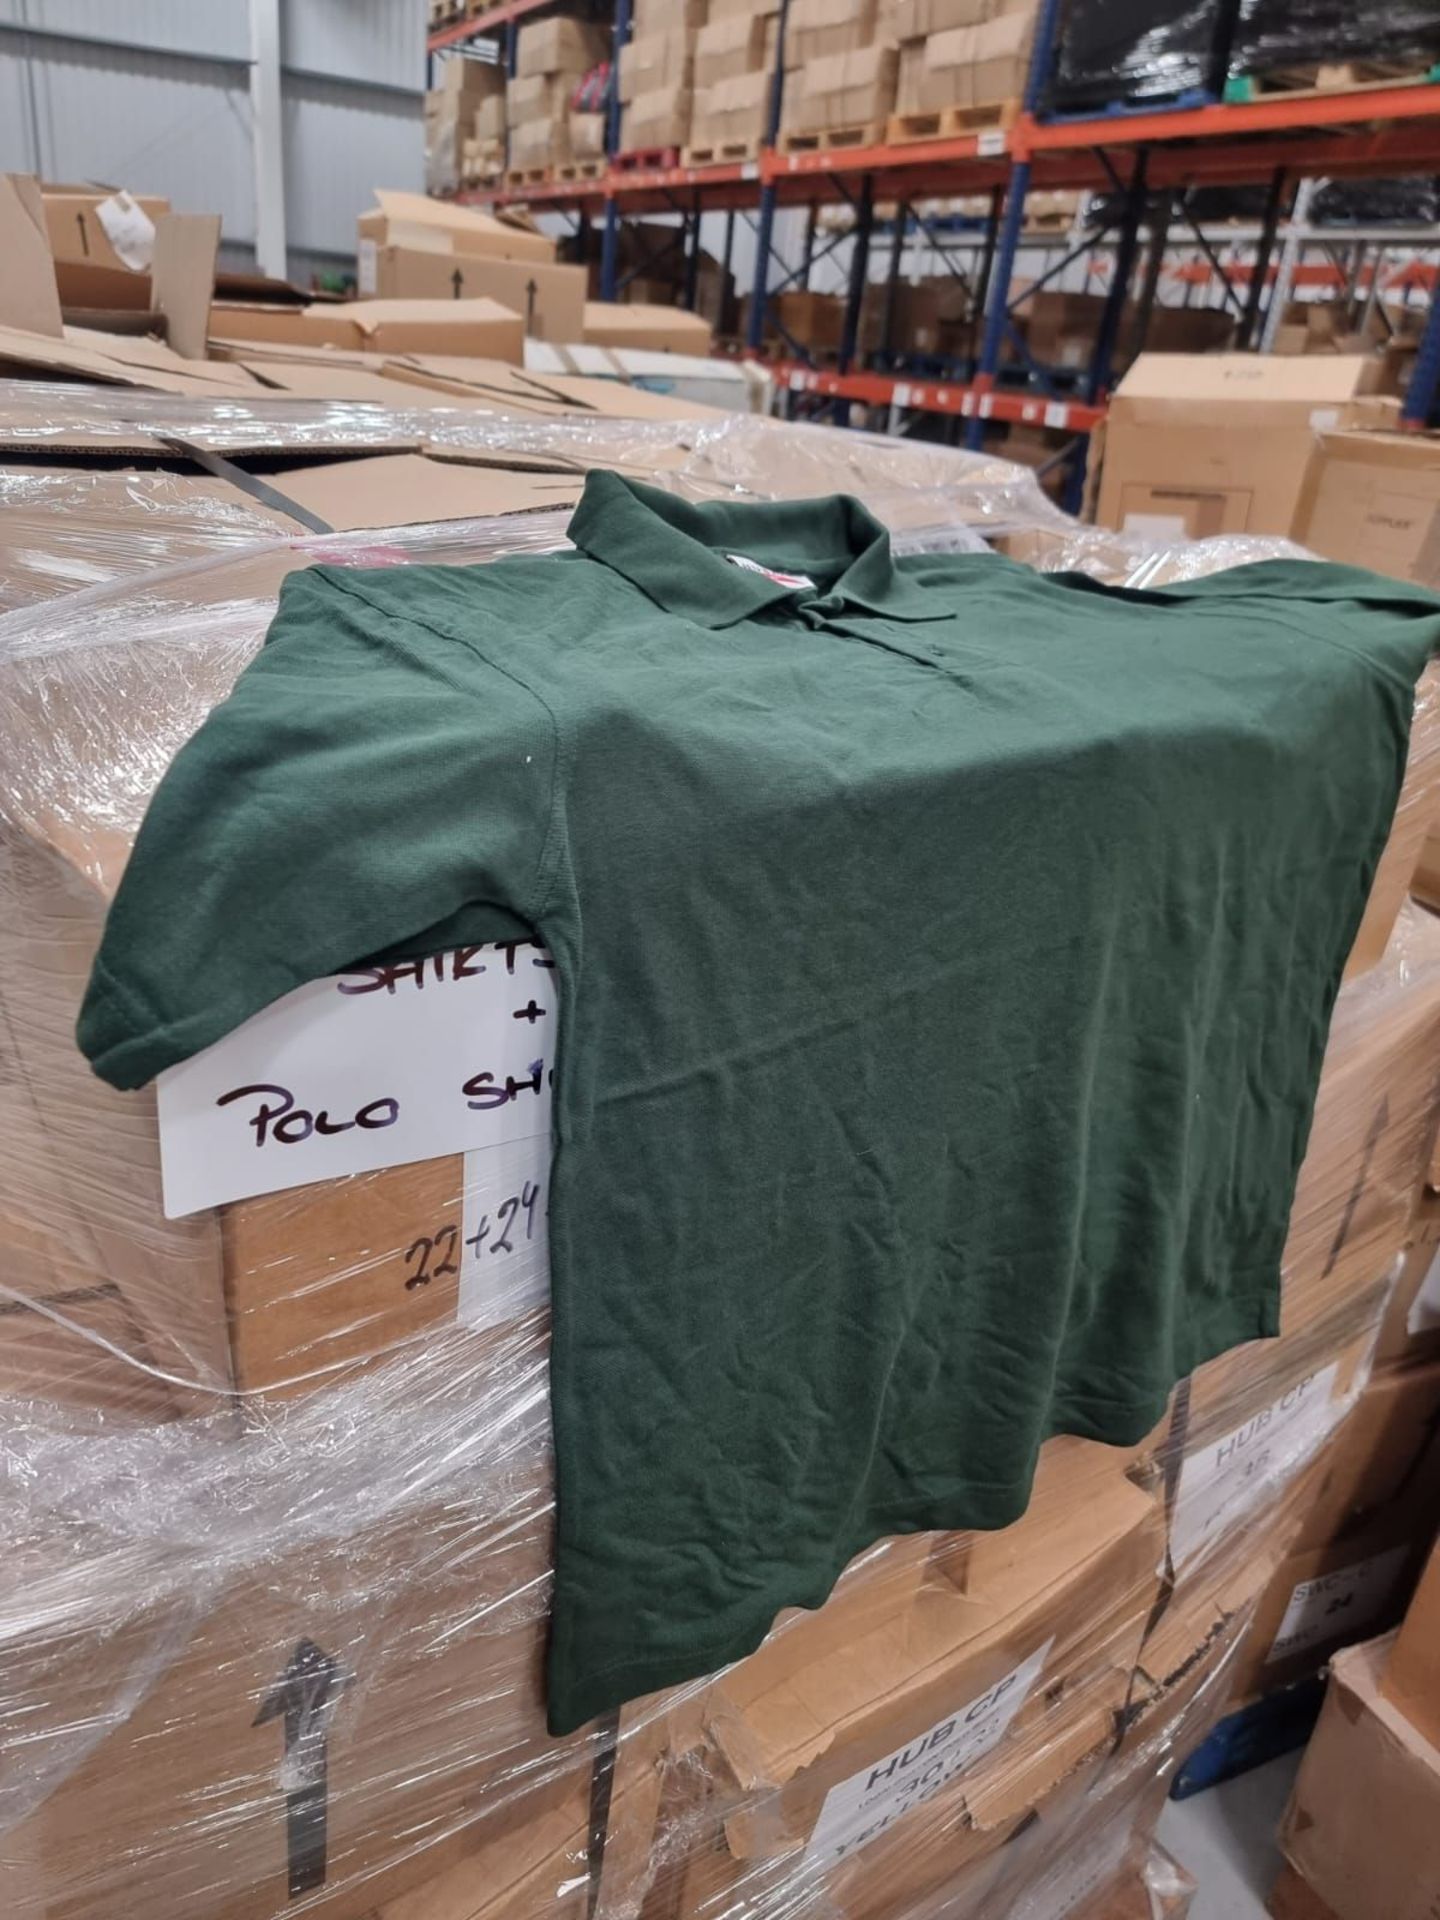 PALLET TO CONTAIN A LARGE QUANTITY OF NEW CLOTHING GOODS. MAY INCLUDE ITEMS SUCH AS: T-SHIRTS, - Bild 15 aus 28